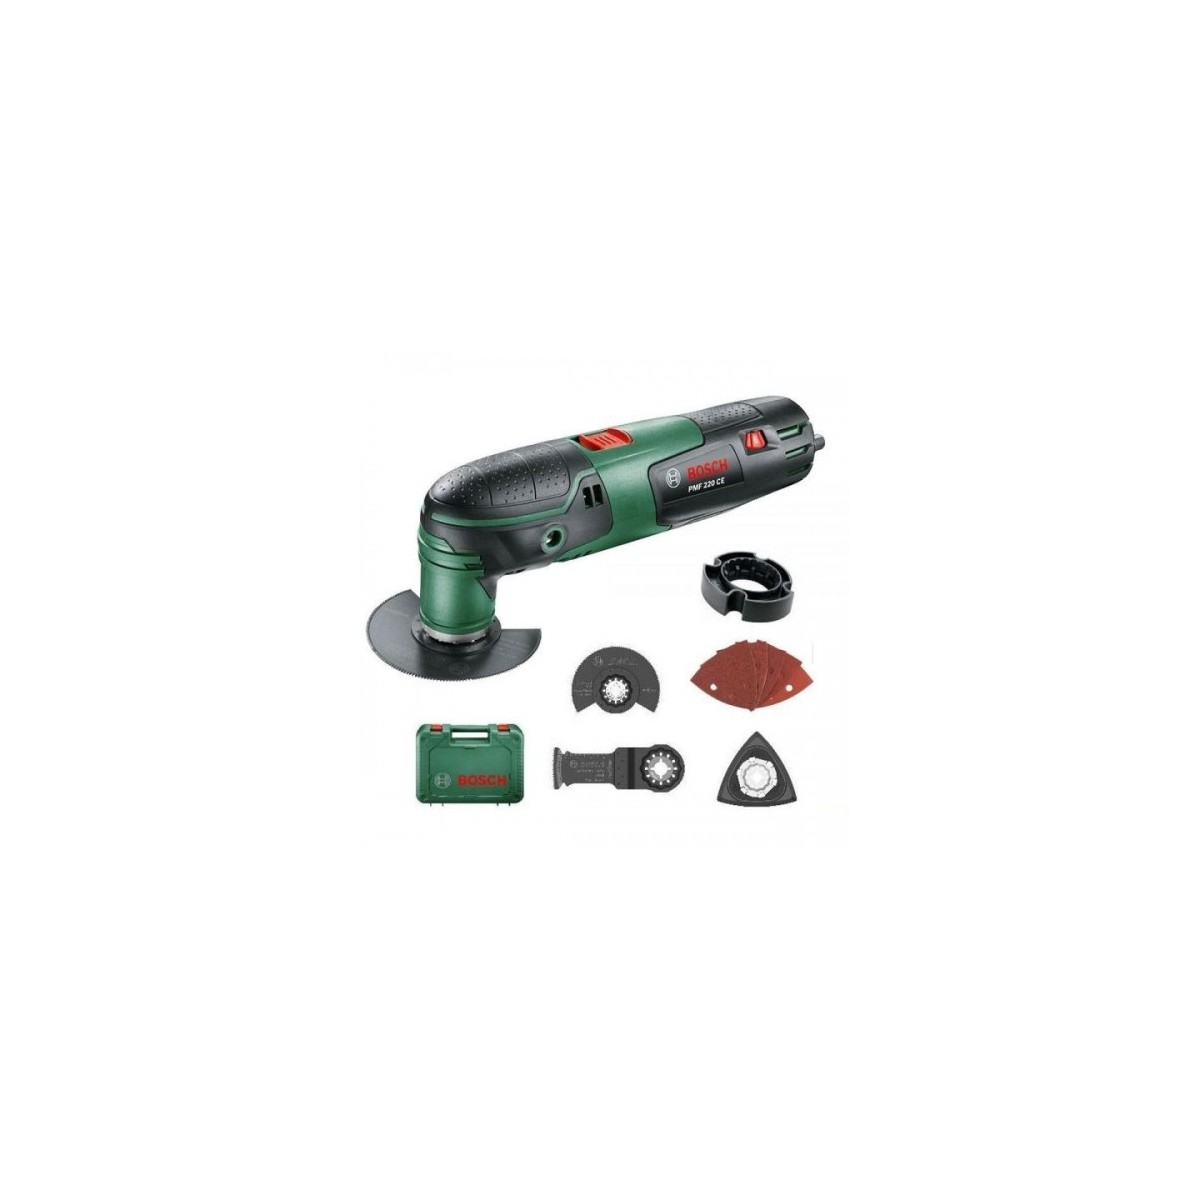 BOSCH Multifunction tools PMF 220 CE 0603102020